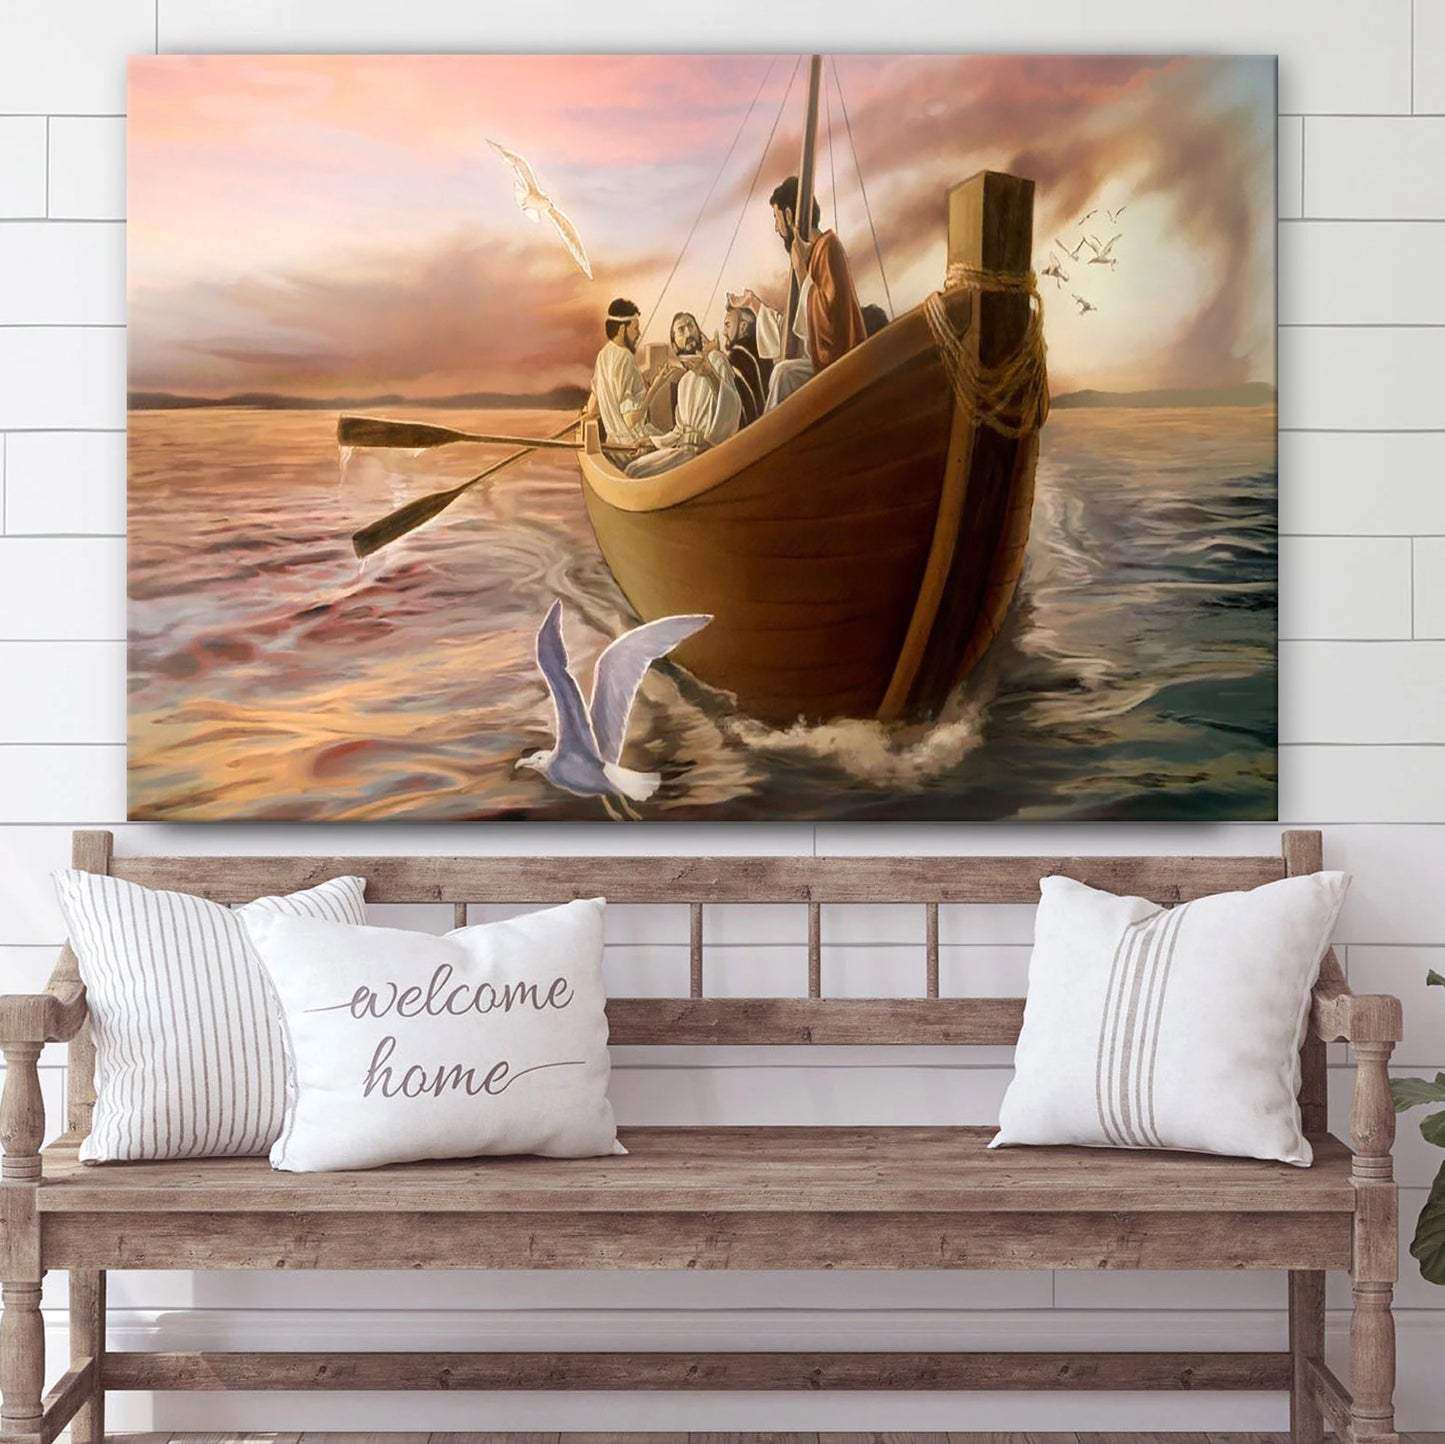 Jesus In Boat With Disciples - Jesus Canvas Wall Art - Christian Wall Art